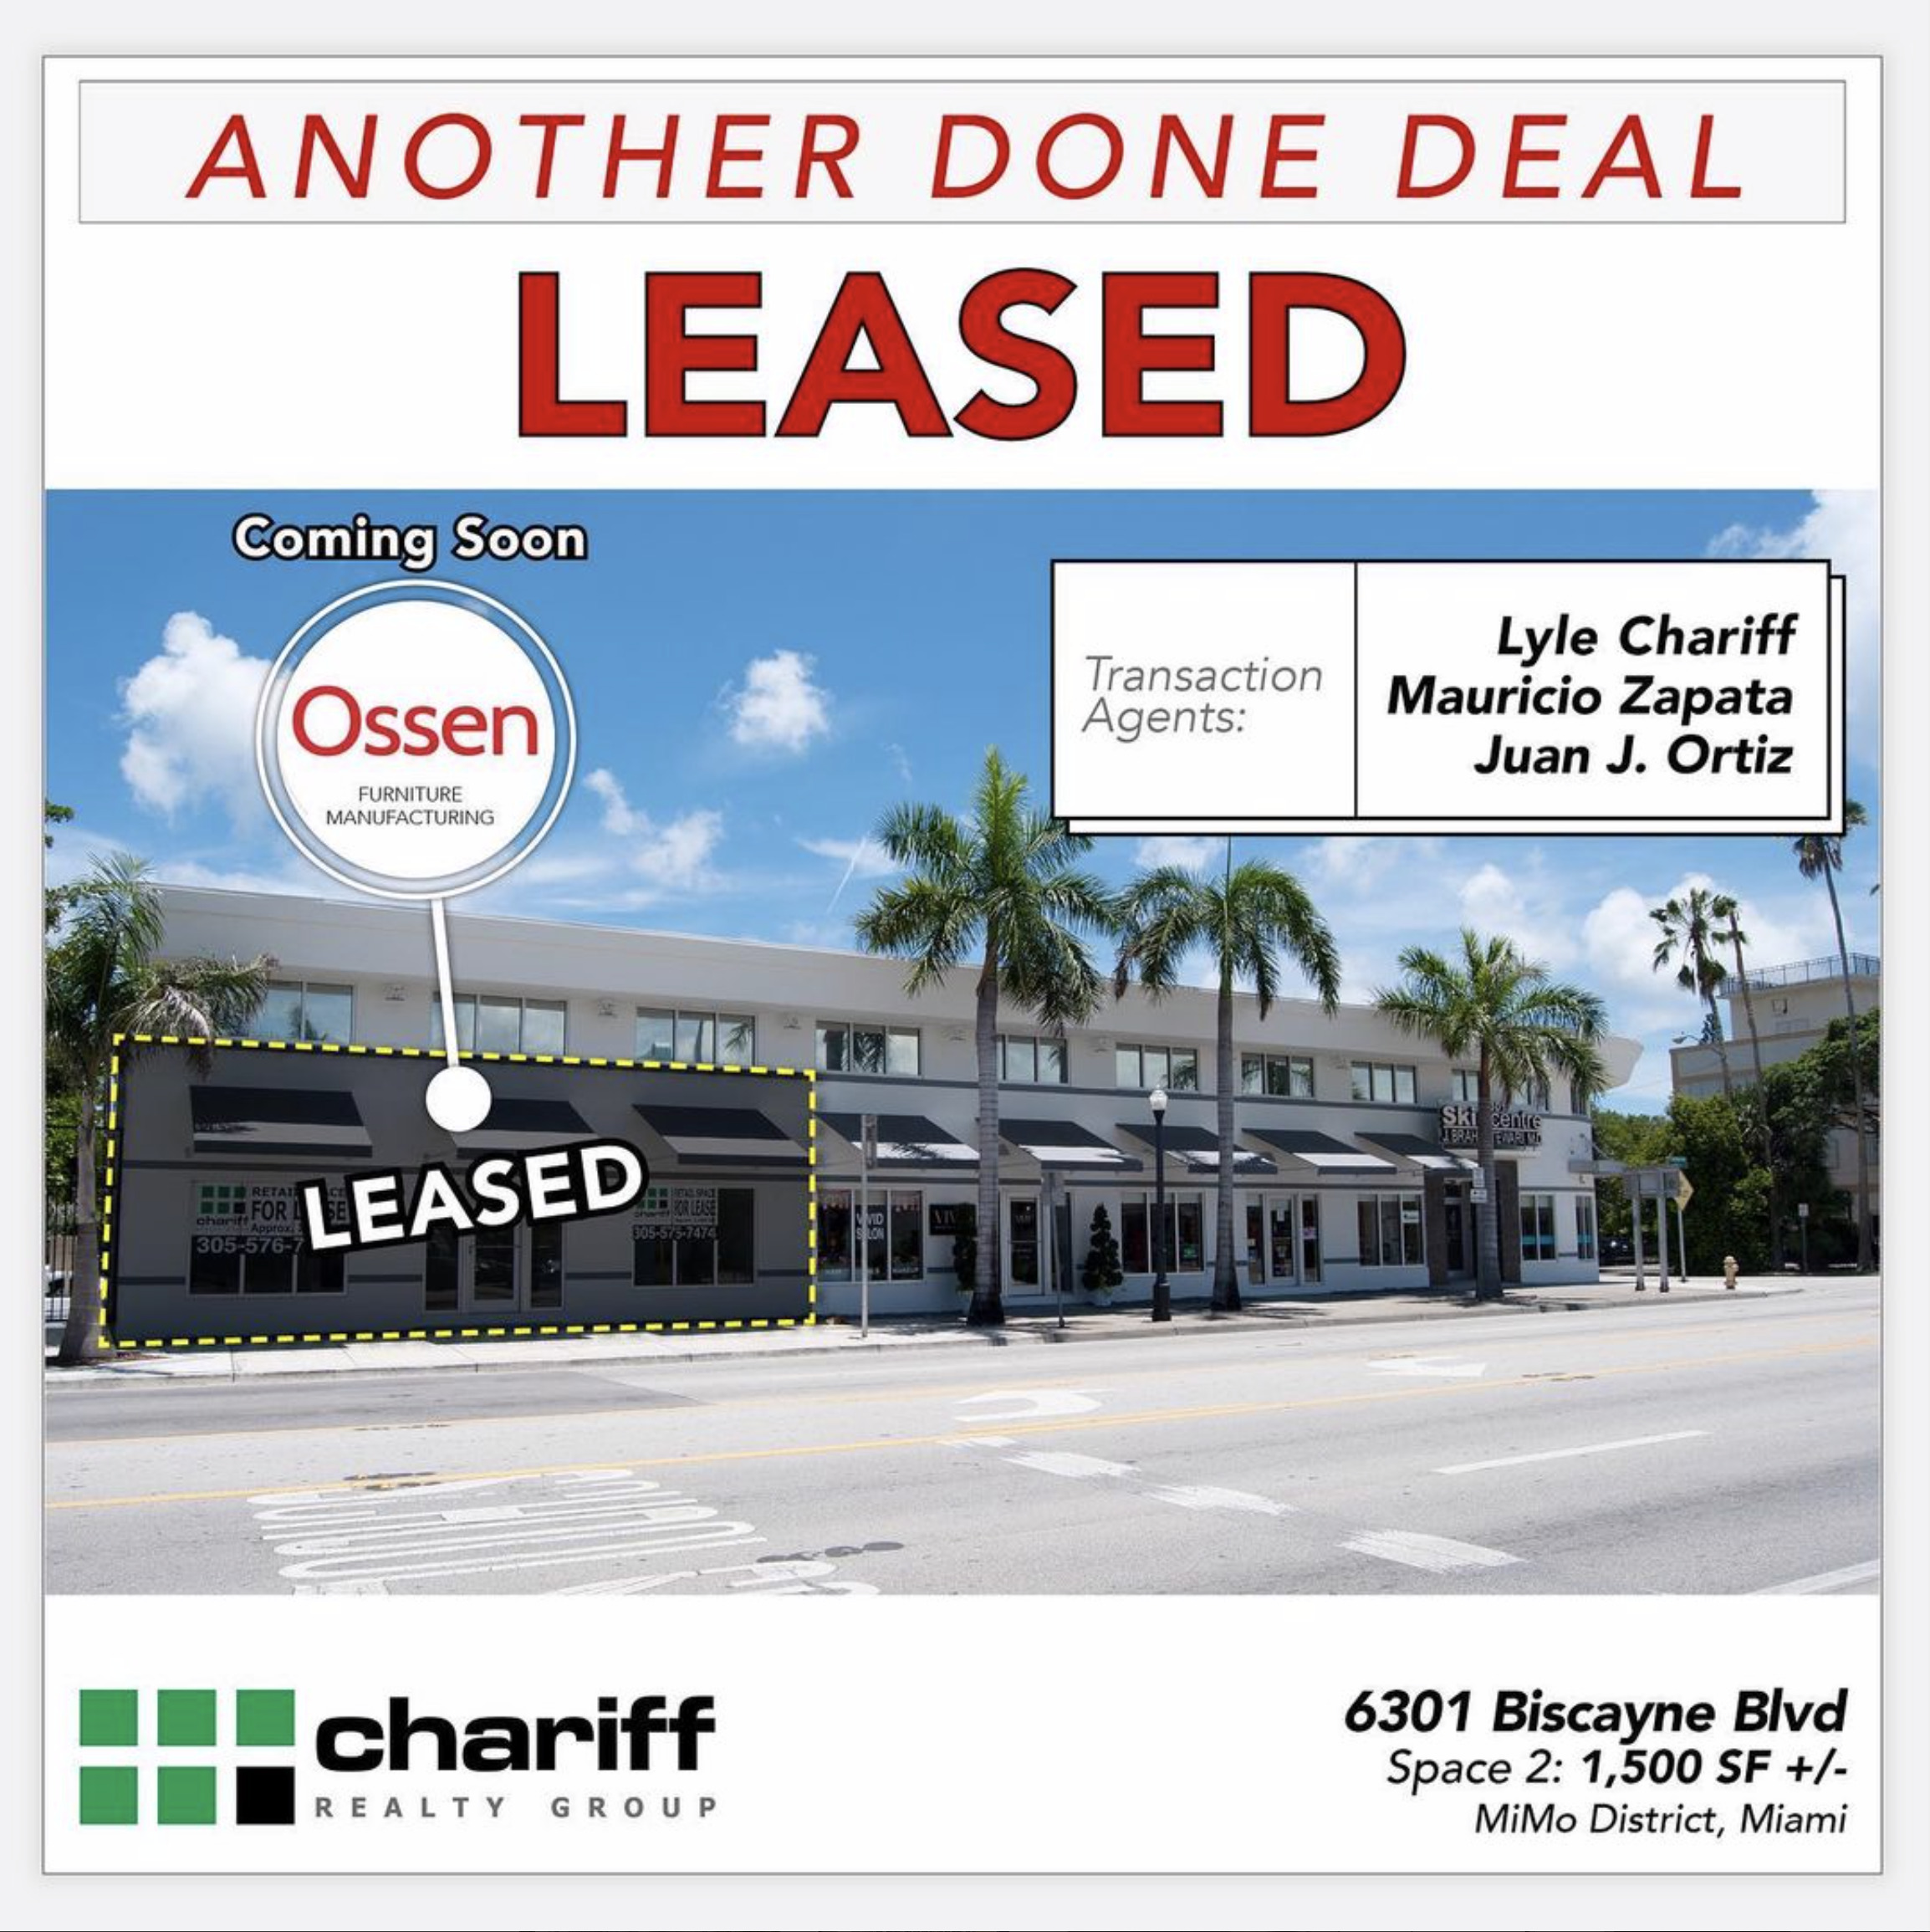 6399 Biscayne Blvd - Another Done Deal - Leased - Mimo District - Miami Florida